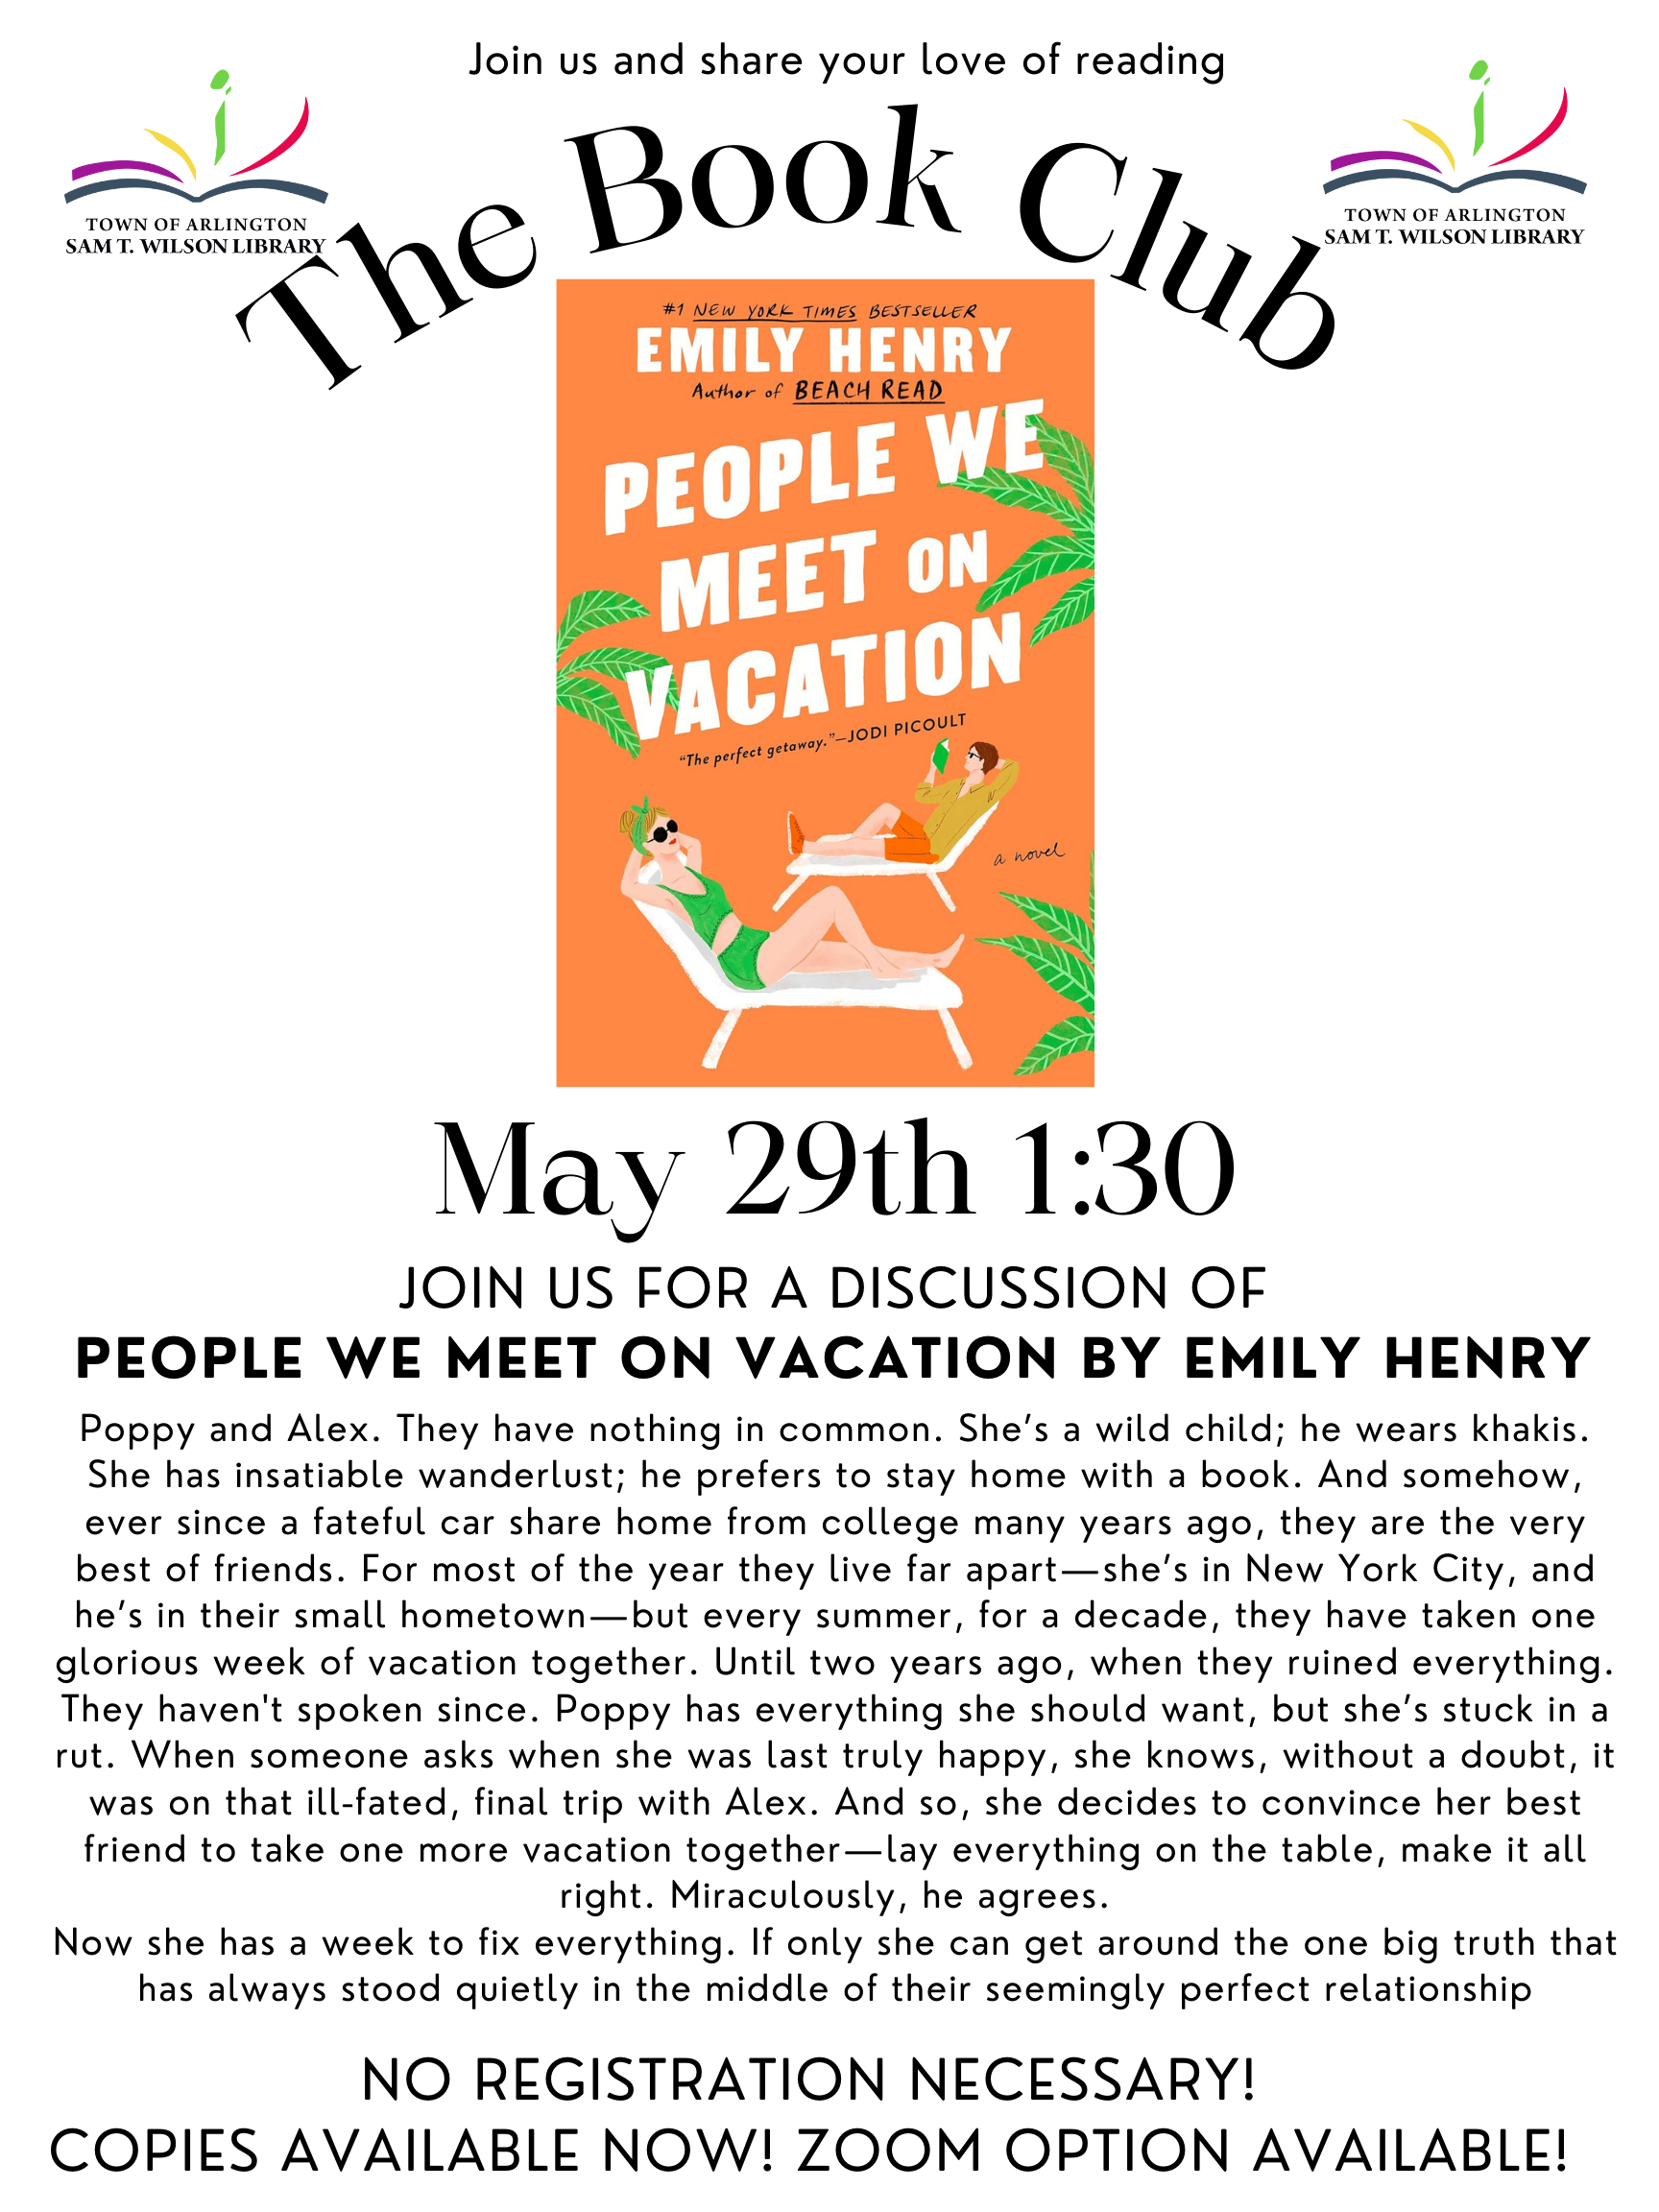 The Book Club, May 29th at 1:30 for discussion of People We Meet On Vacation by Emily Henry